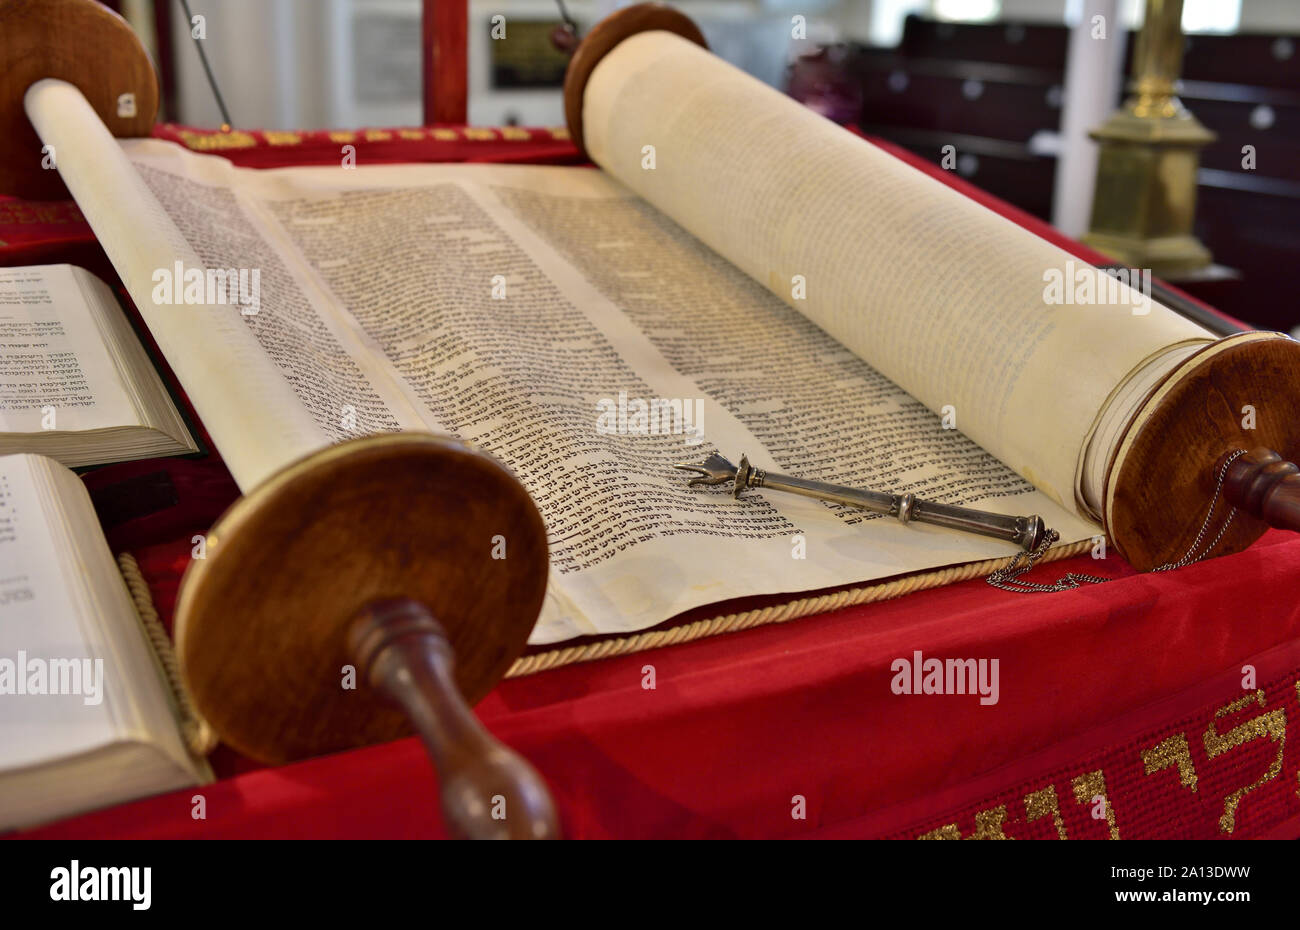 Close-up detail of traditional Torah scroll book in Synagogue Stock Photo